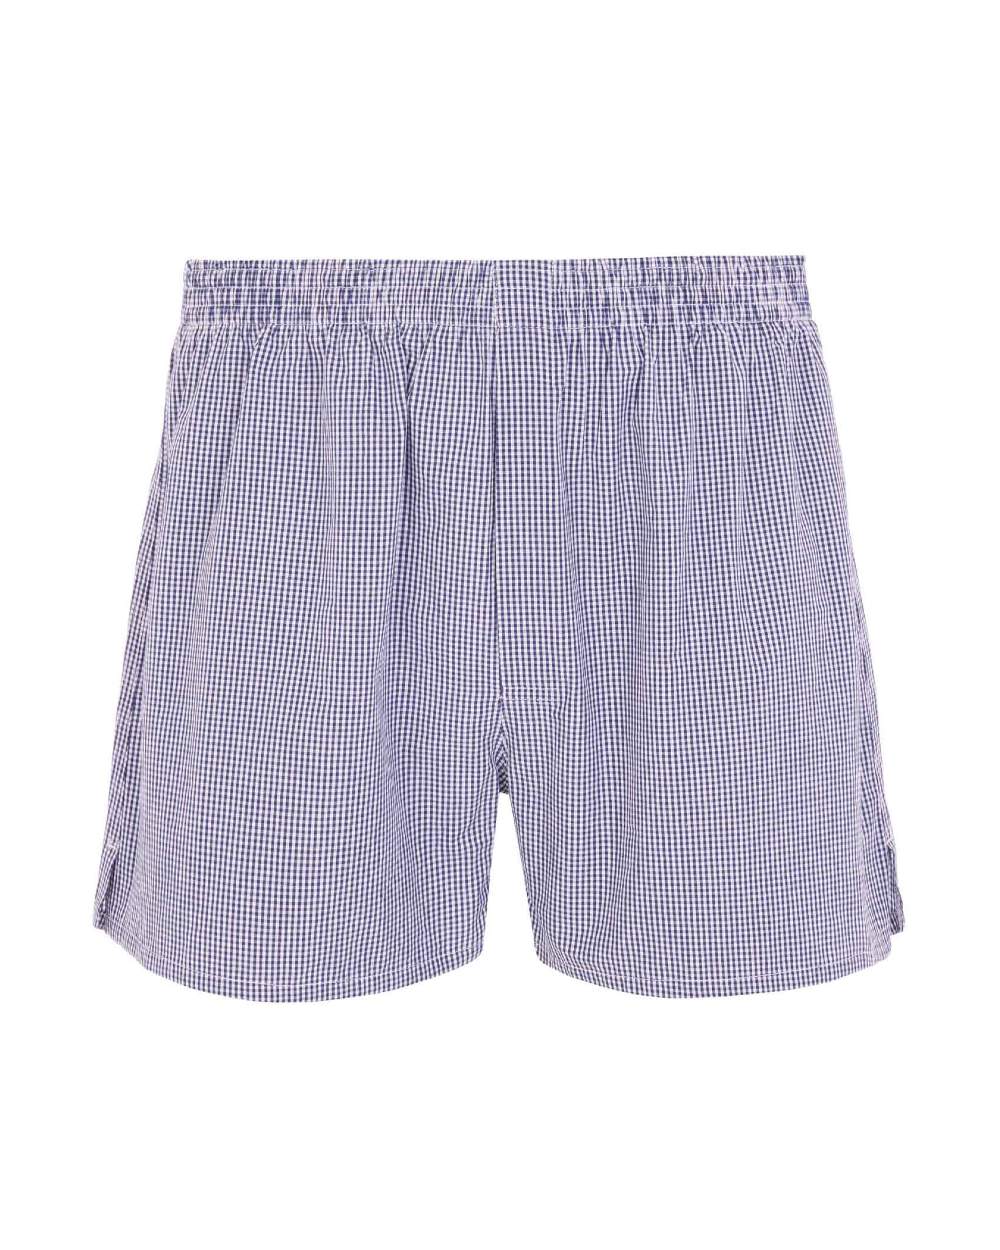 HJ Hall 2 Pack Pure Cotton Woven Boxers in Navy Check 